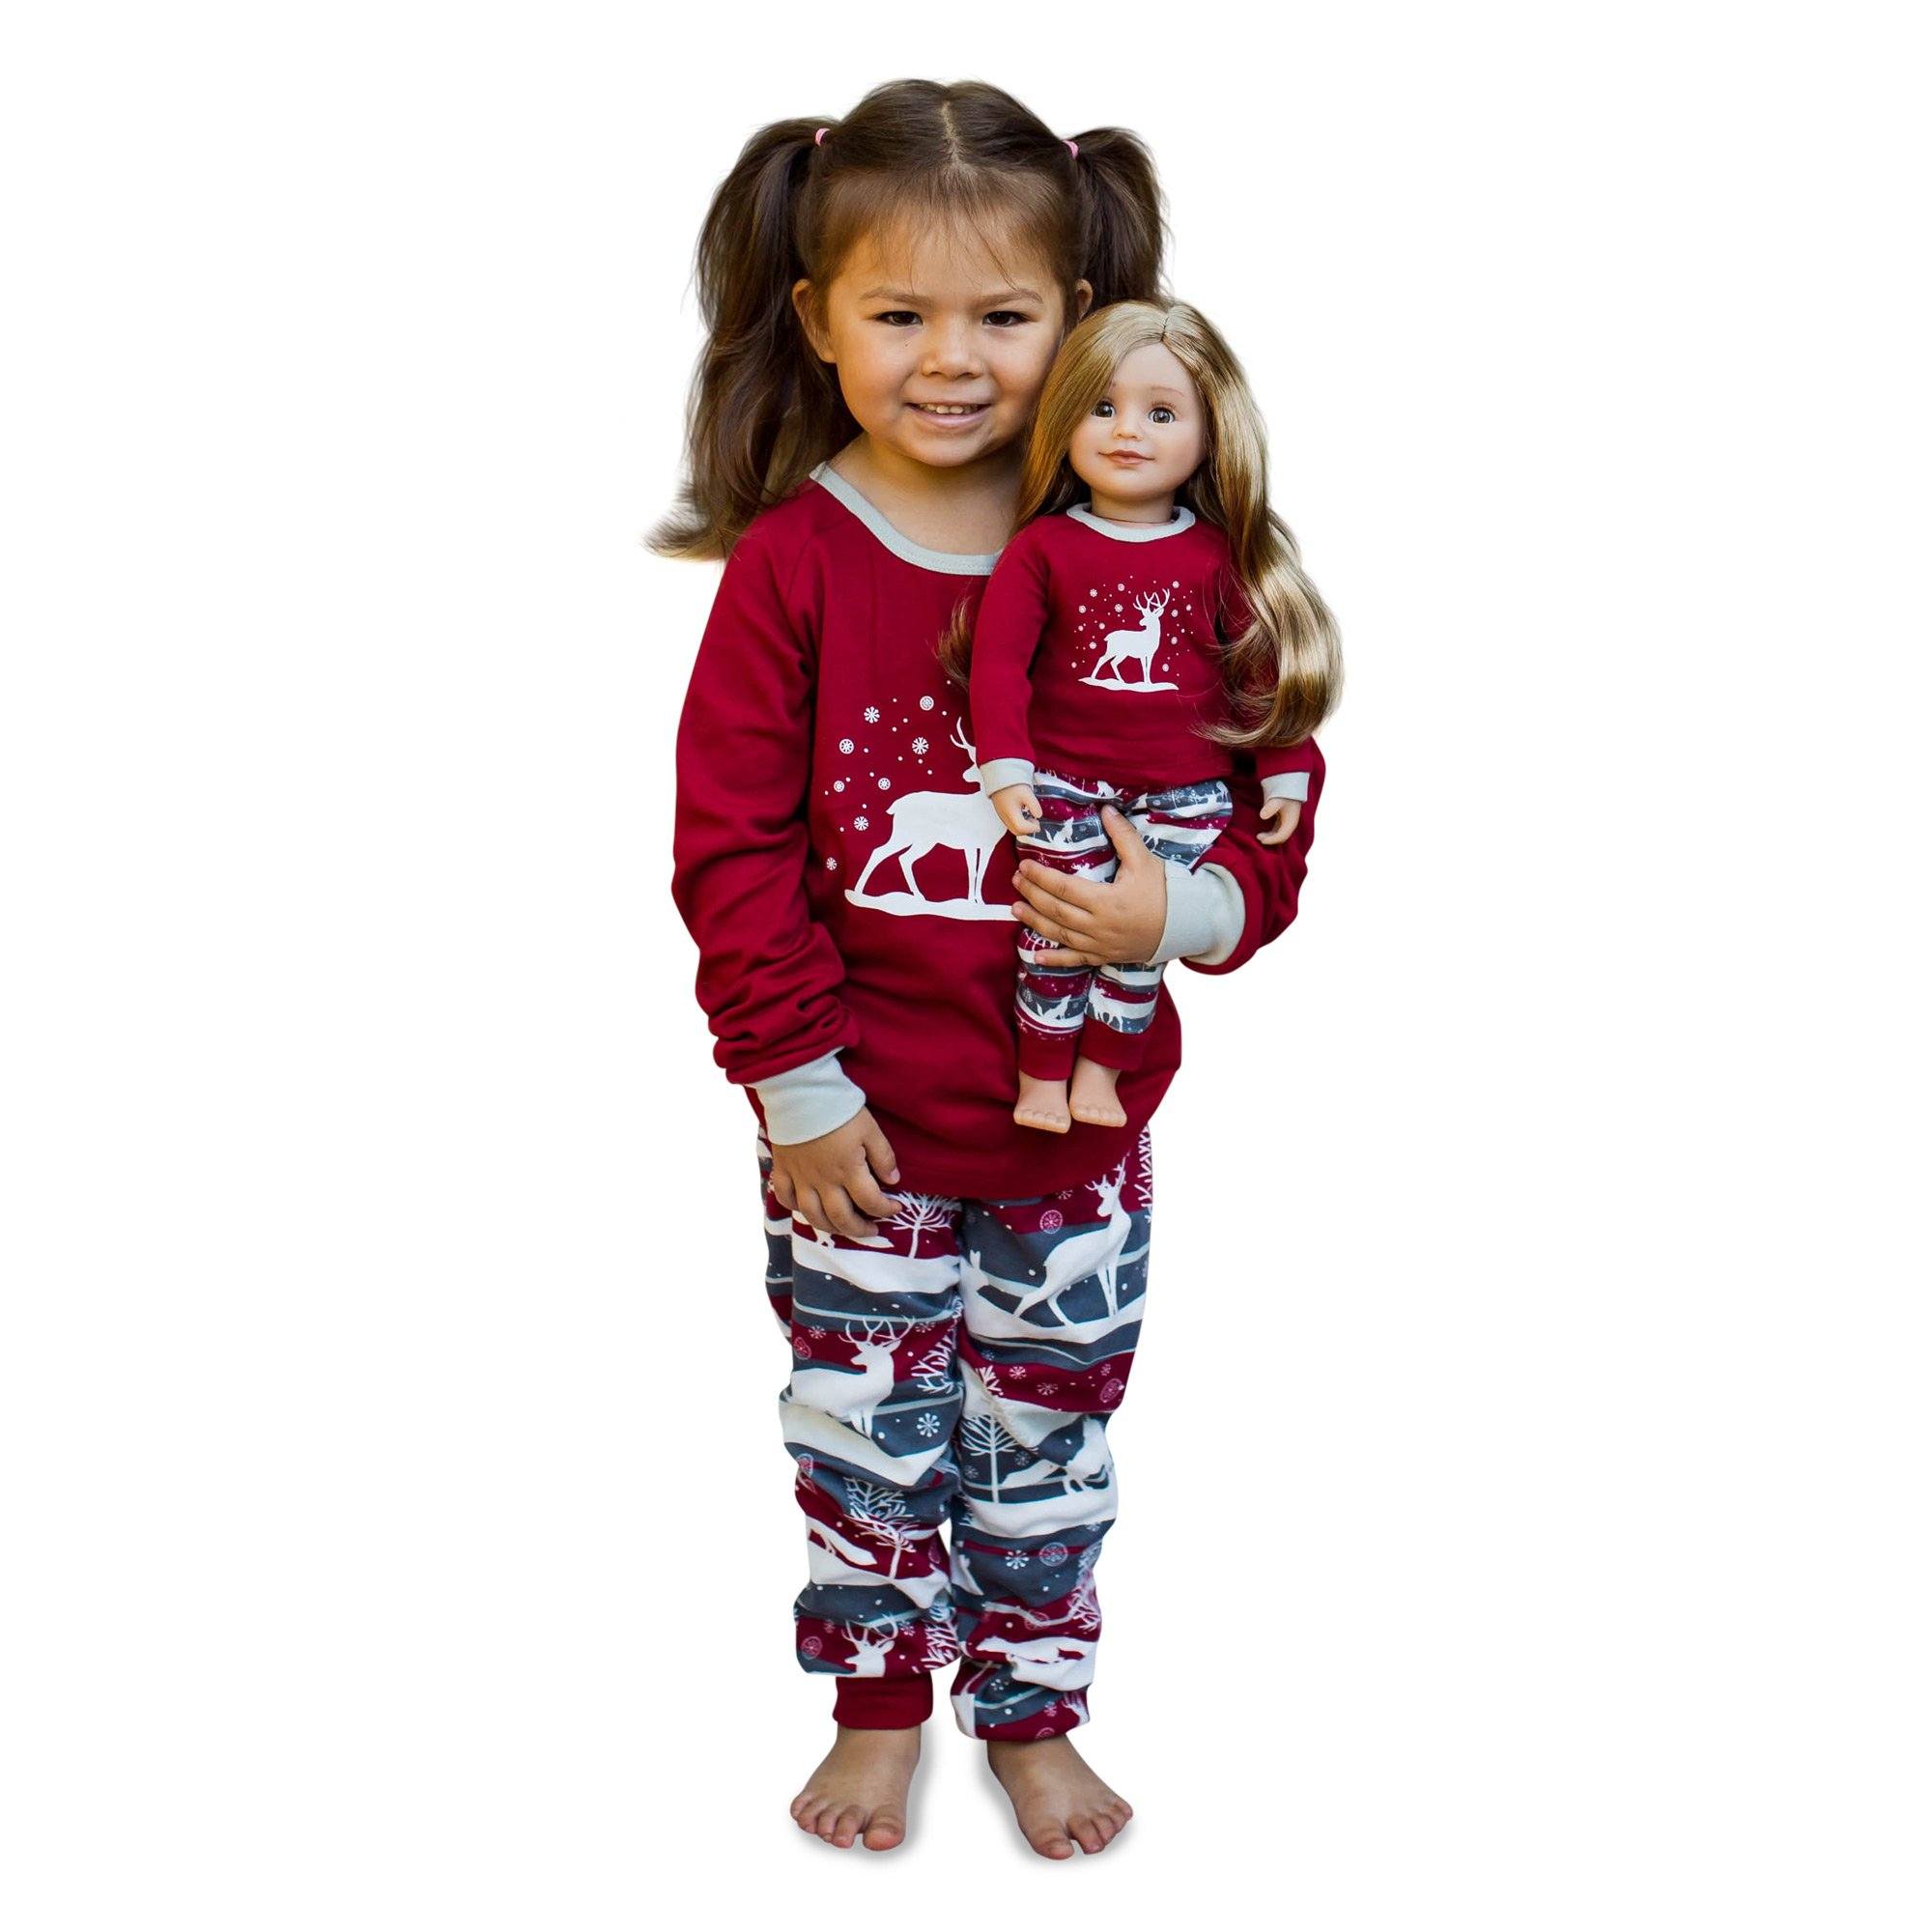 Little girl and doll dressing alike in matching pjs with winter theme.